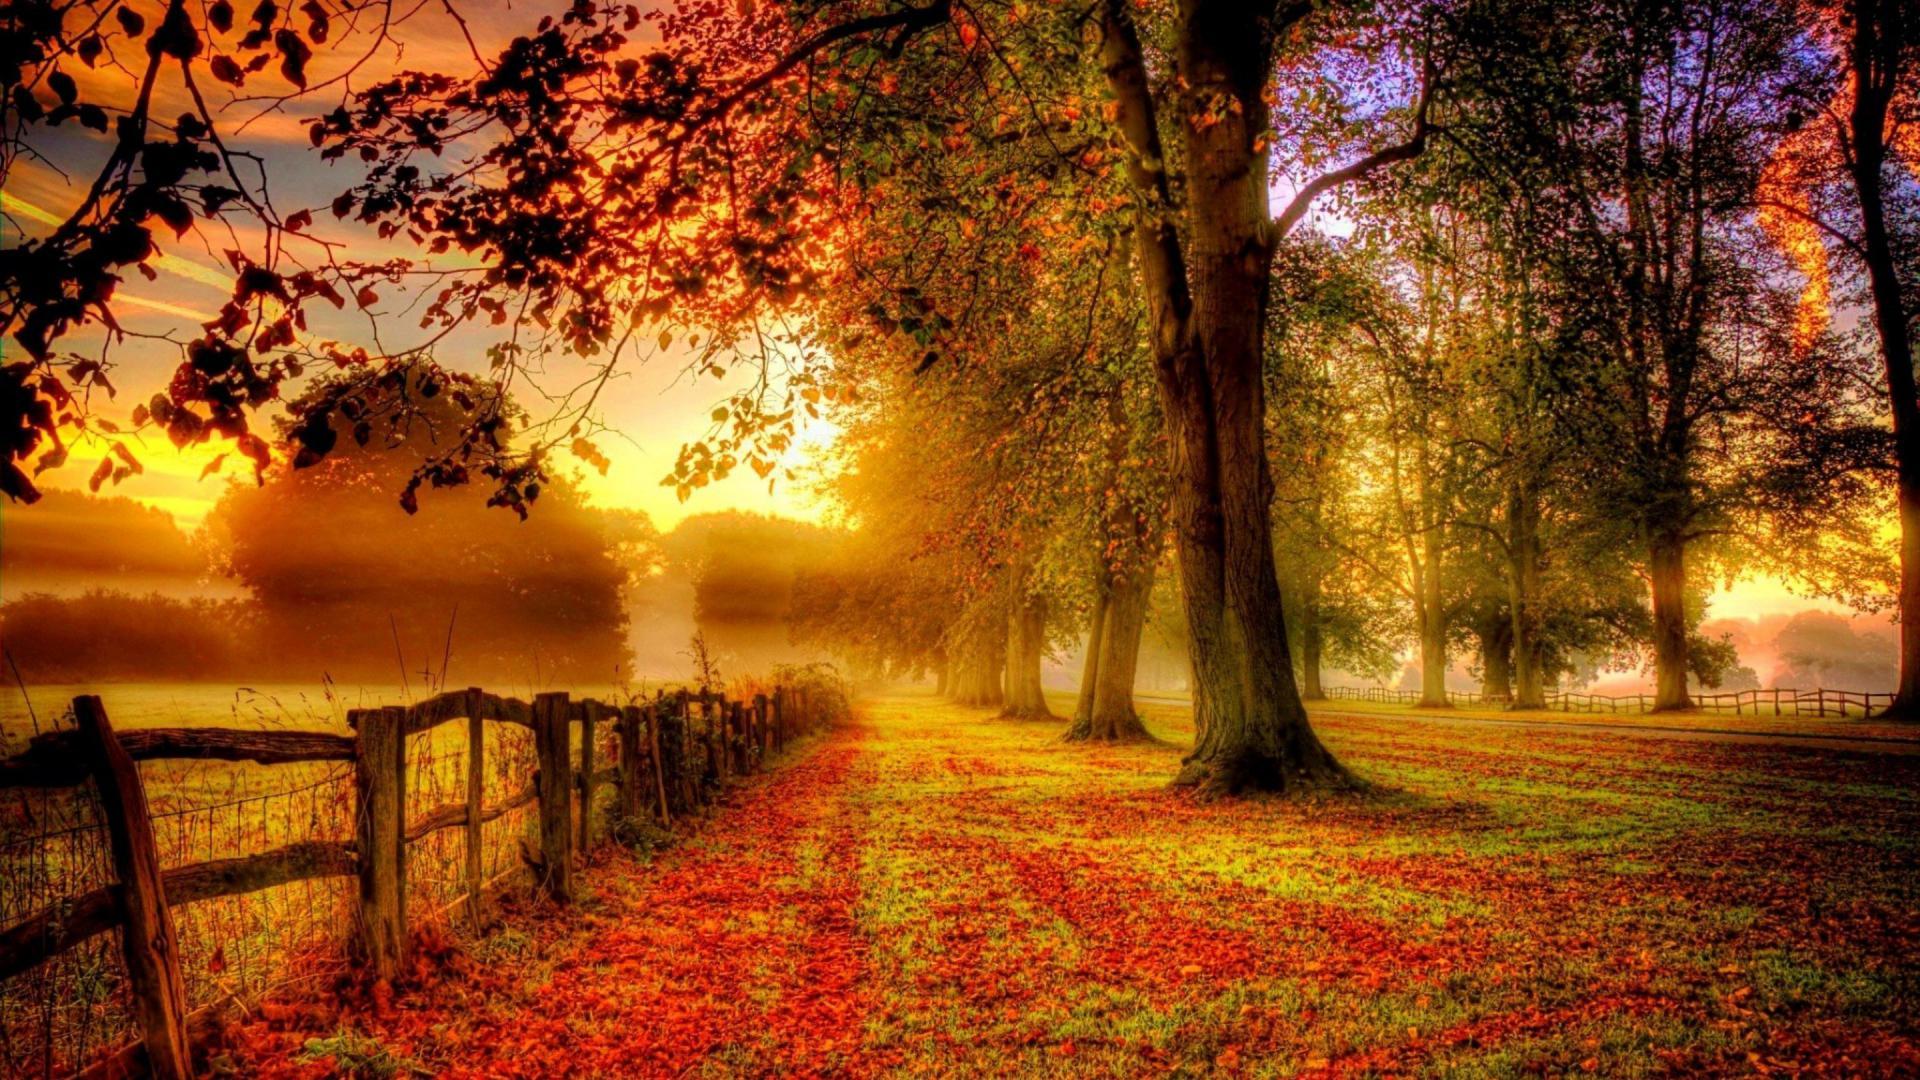 Nature Wallpaper with Colorful Autumn Forest 1920 x1080